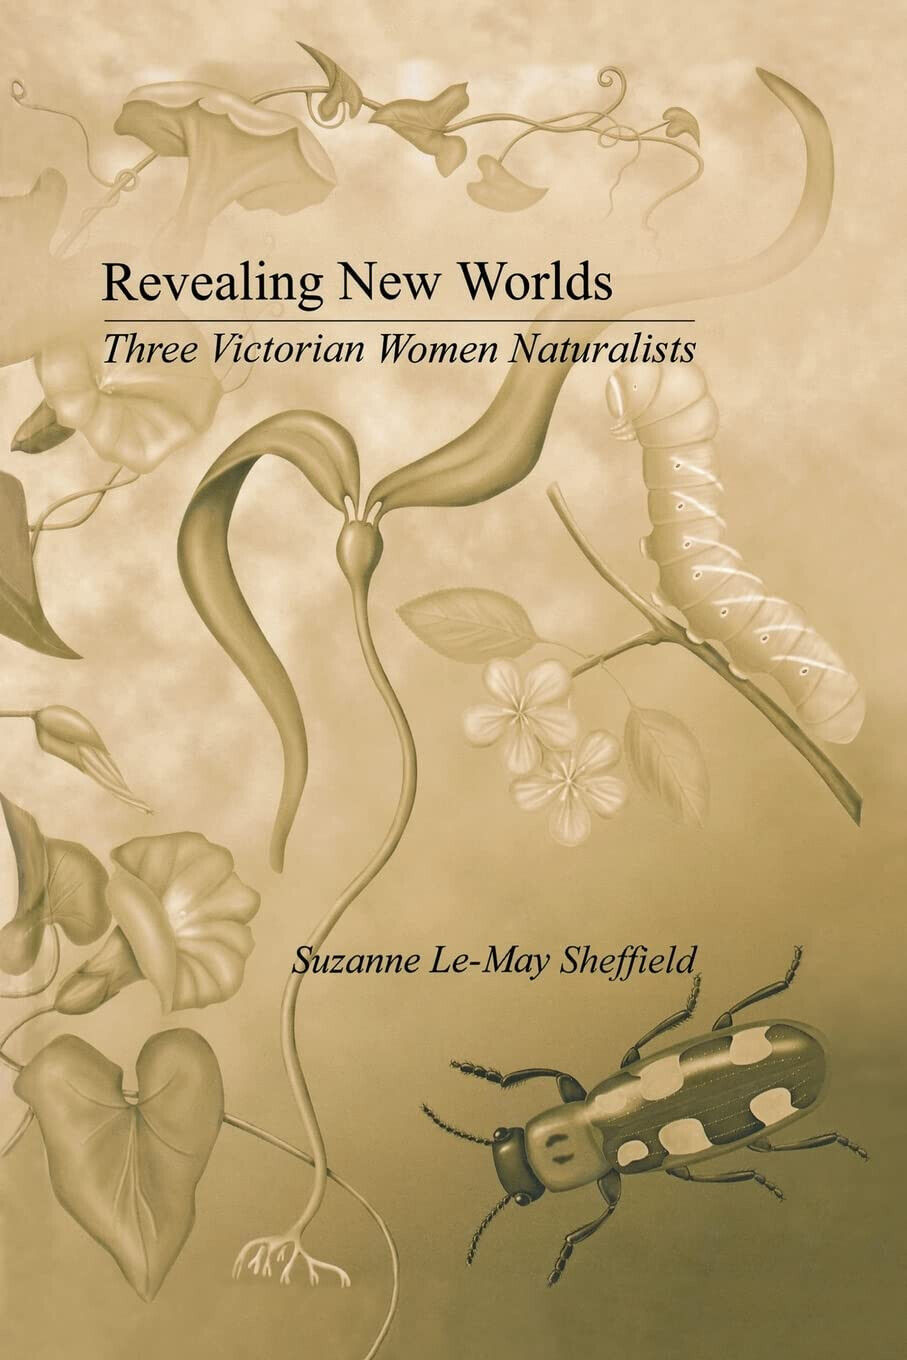 Revealing New Worlds - Suzanne Le-May Sheffield - 2013